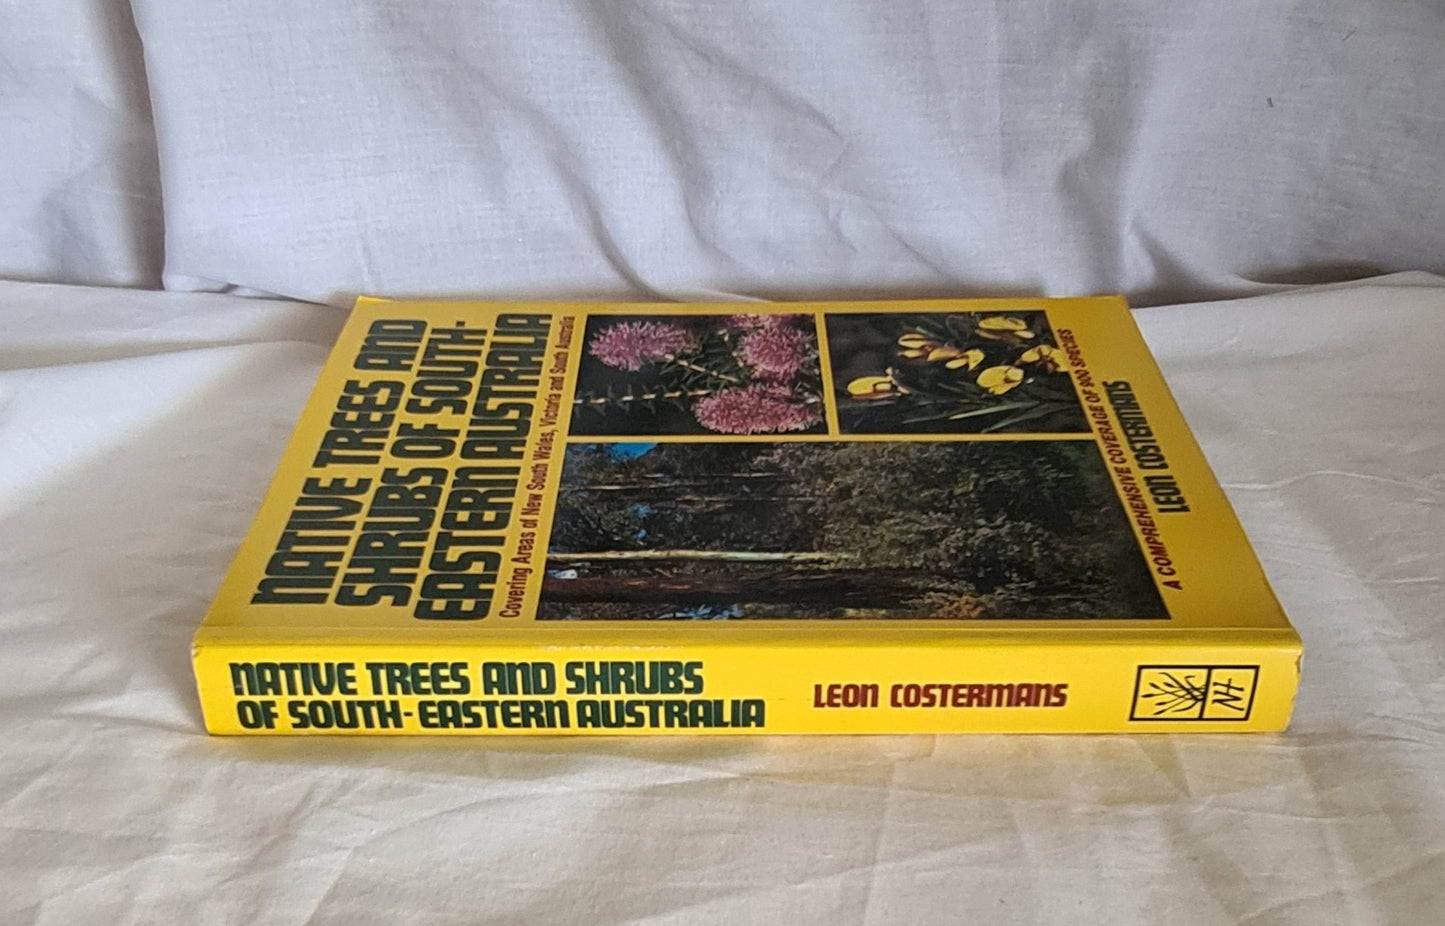 Native Trees and Shrubs of South-Eastern Australia by Leon Costermans